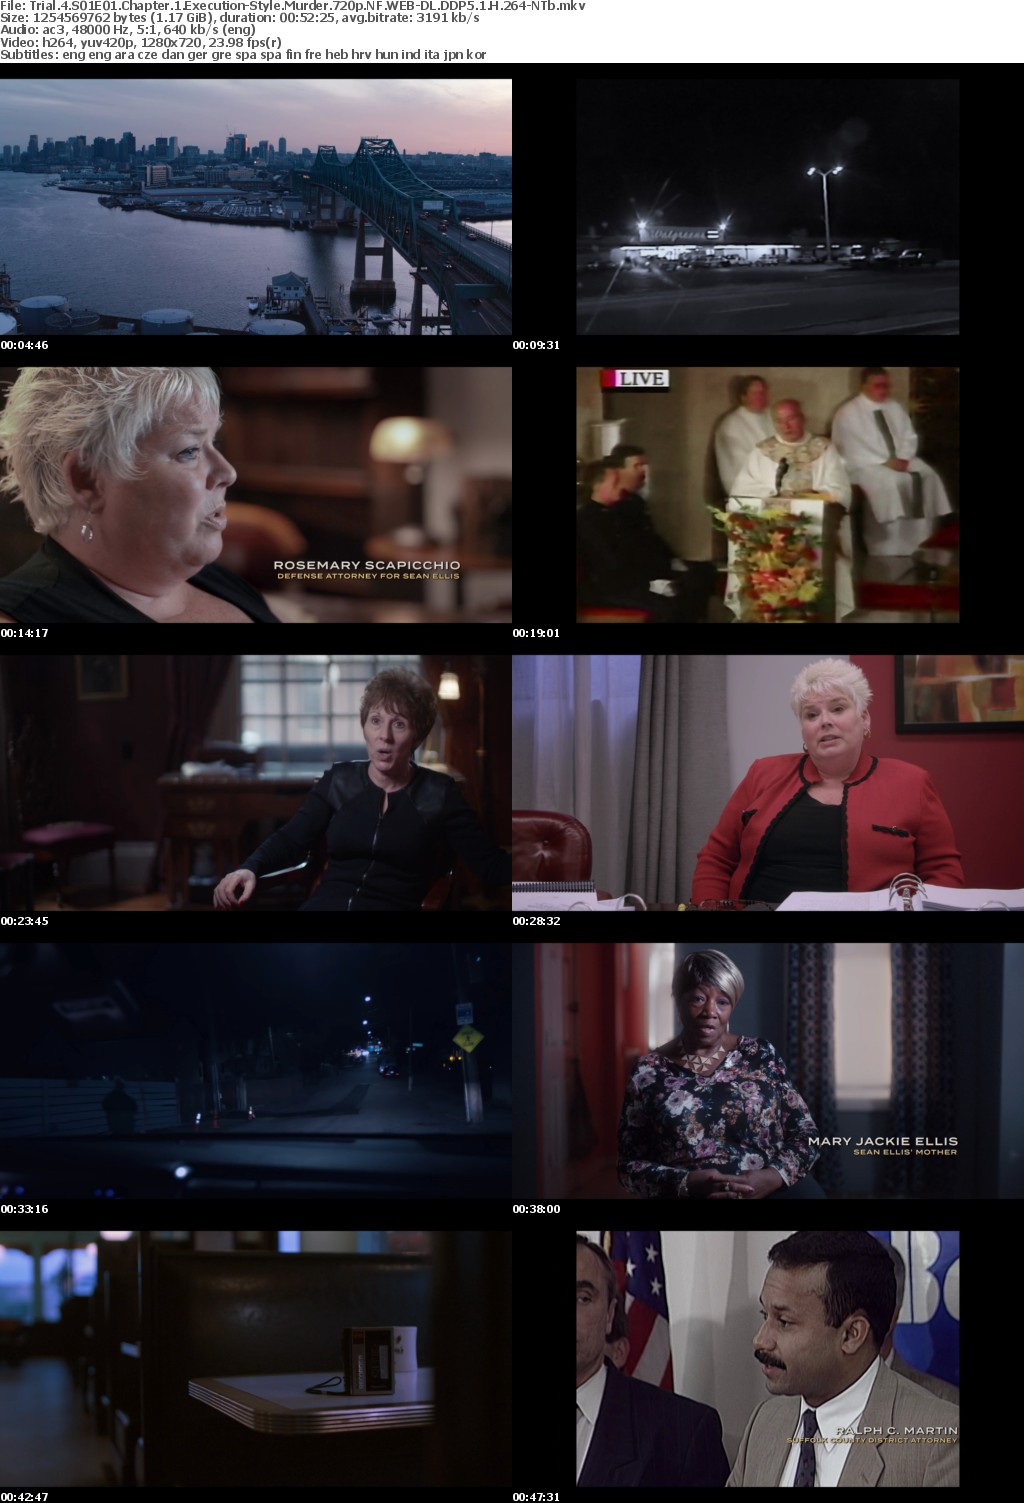 Trial 4 S01E01 Chapter 1 Execution-Style Murder 720p NF WEB-DL DDP5 1 H 264-NTb